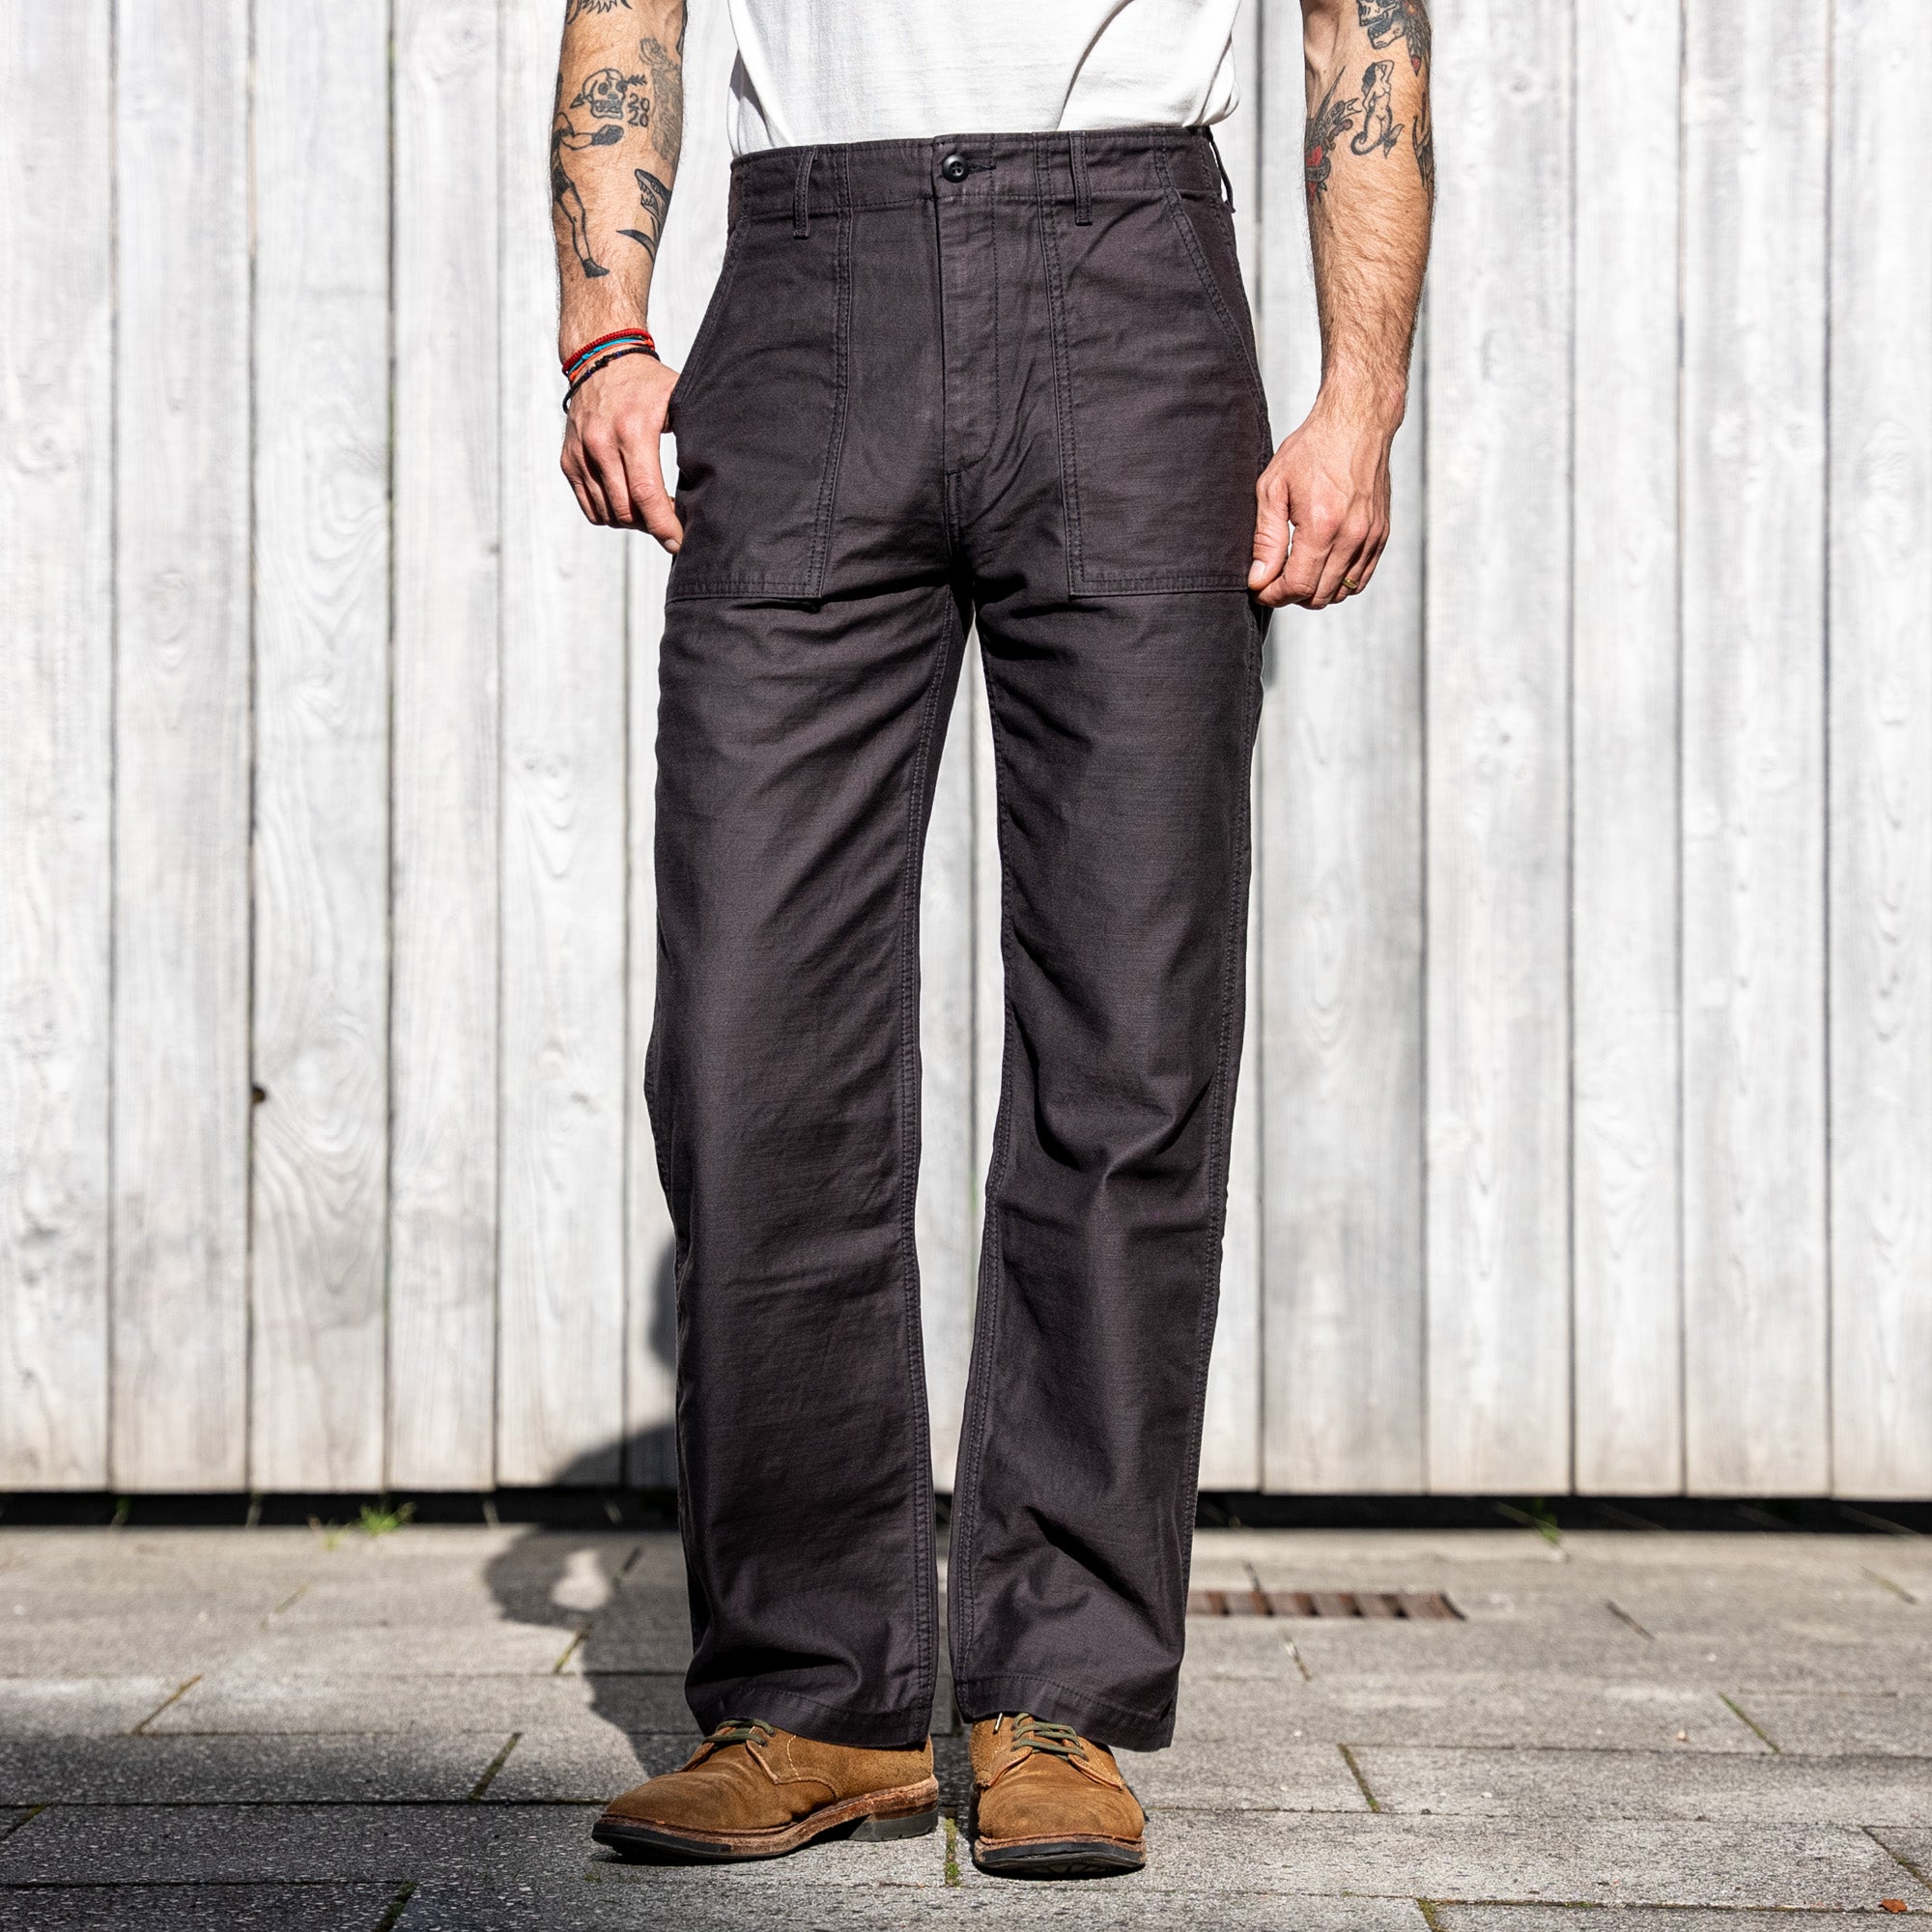 Navy Textured Relaxed Fit Boot-Cut Pant, Buy Wide Legged Trousers